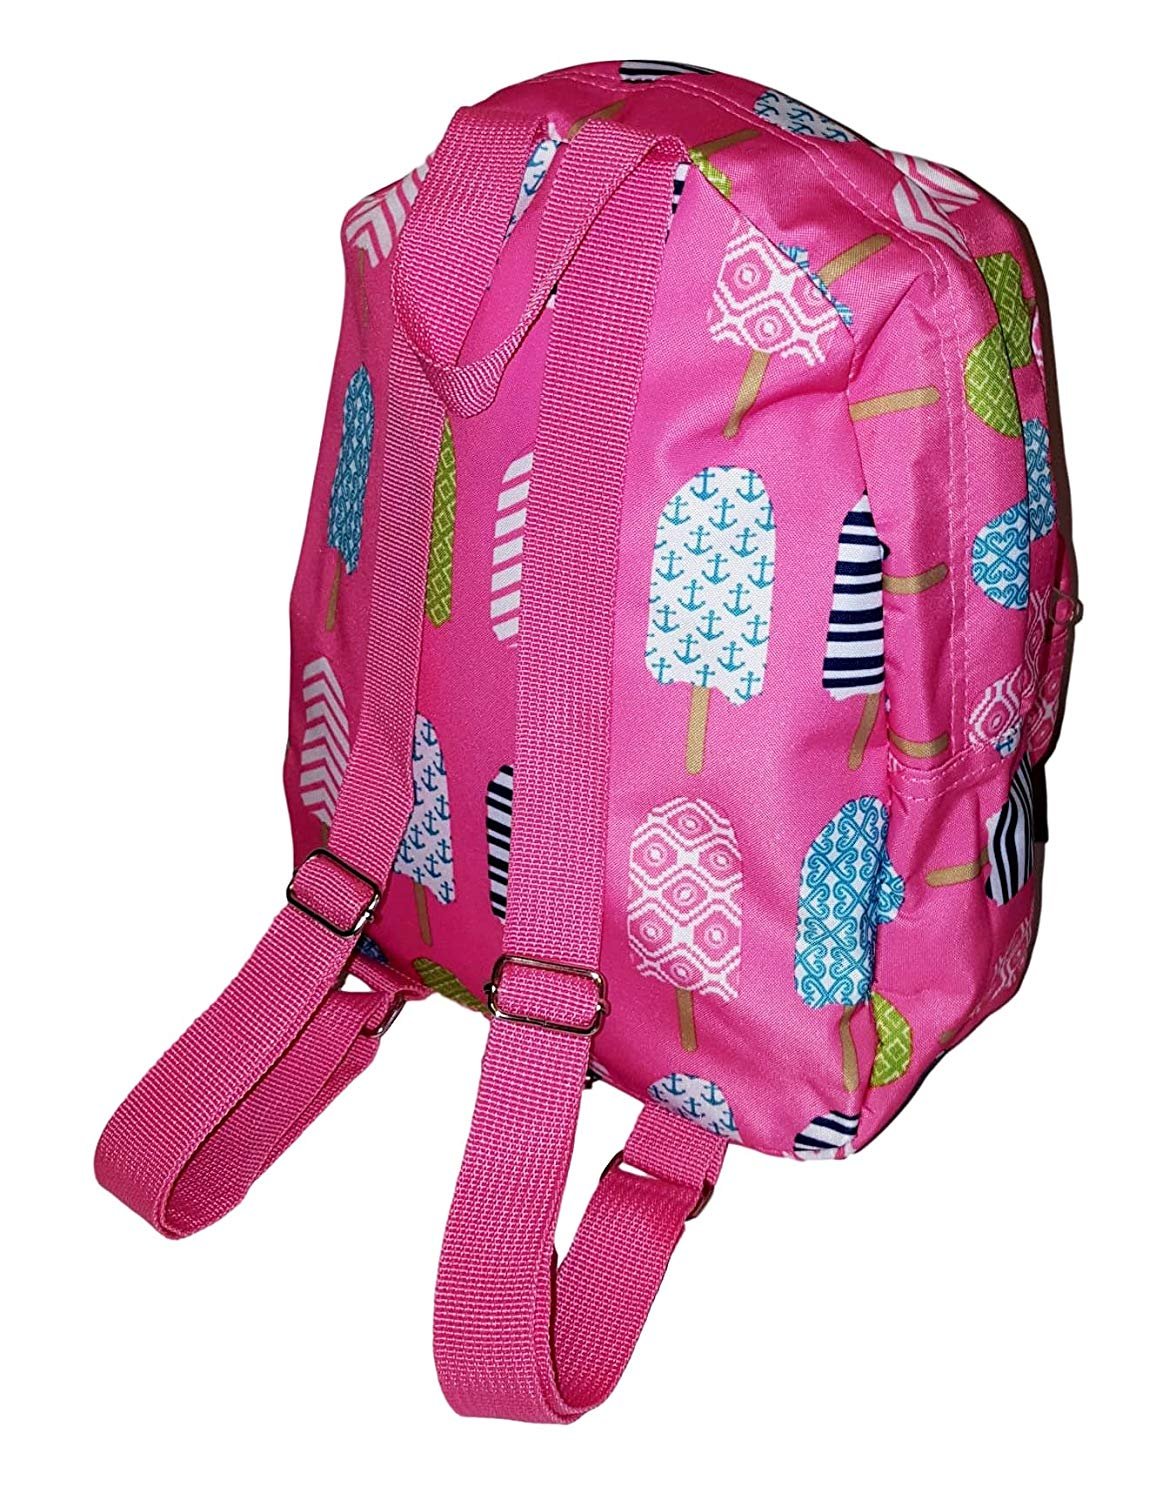 11-inch Mini Backpack Purse, Zipper Front Pockets Teen Child Pink Ice Cream Print - image 3 of 3